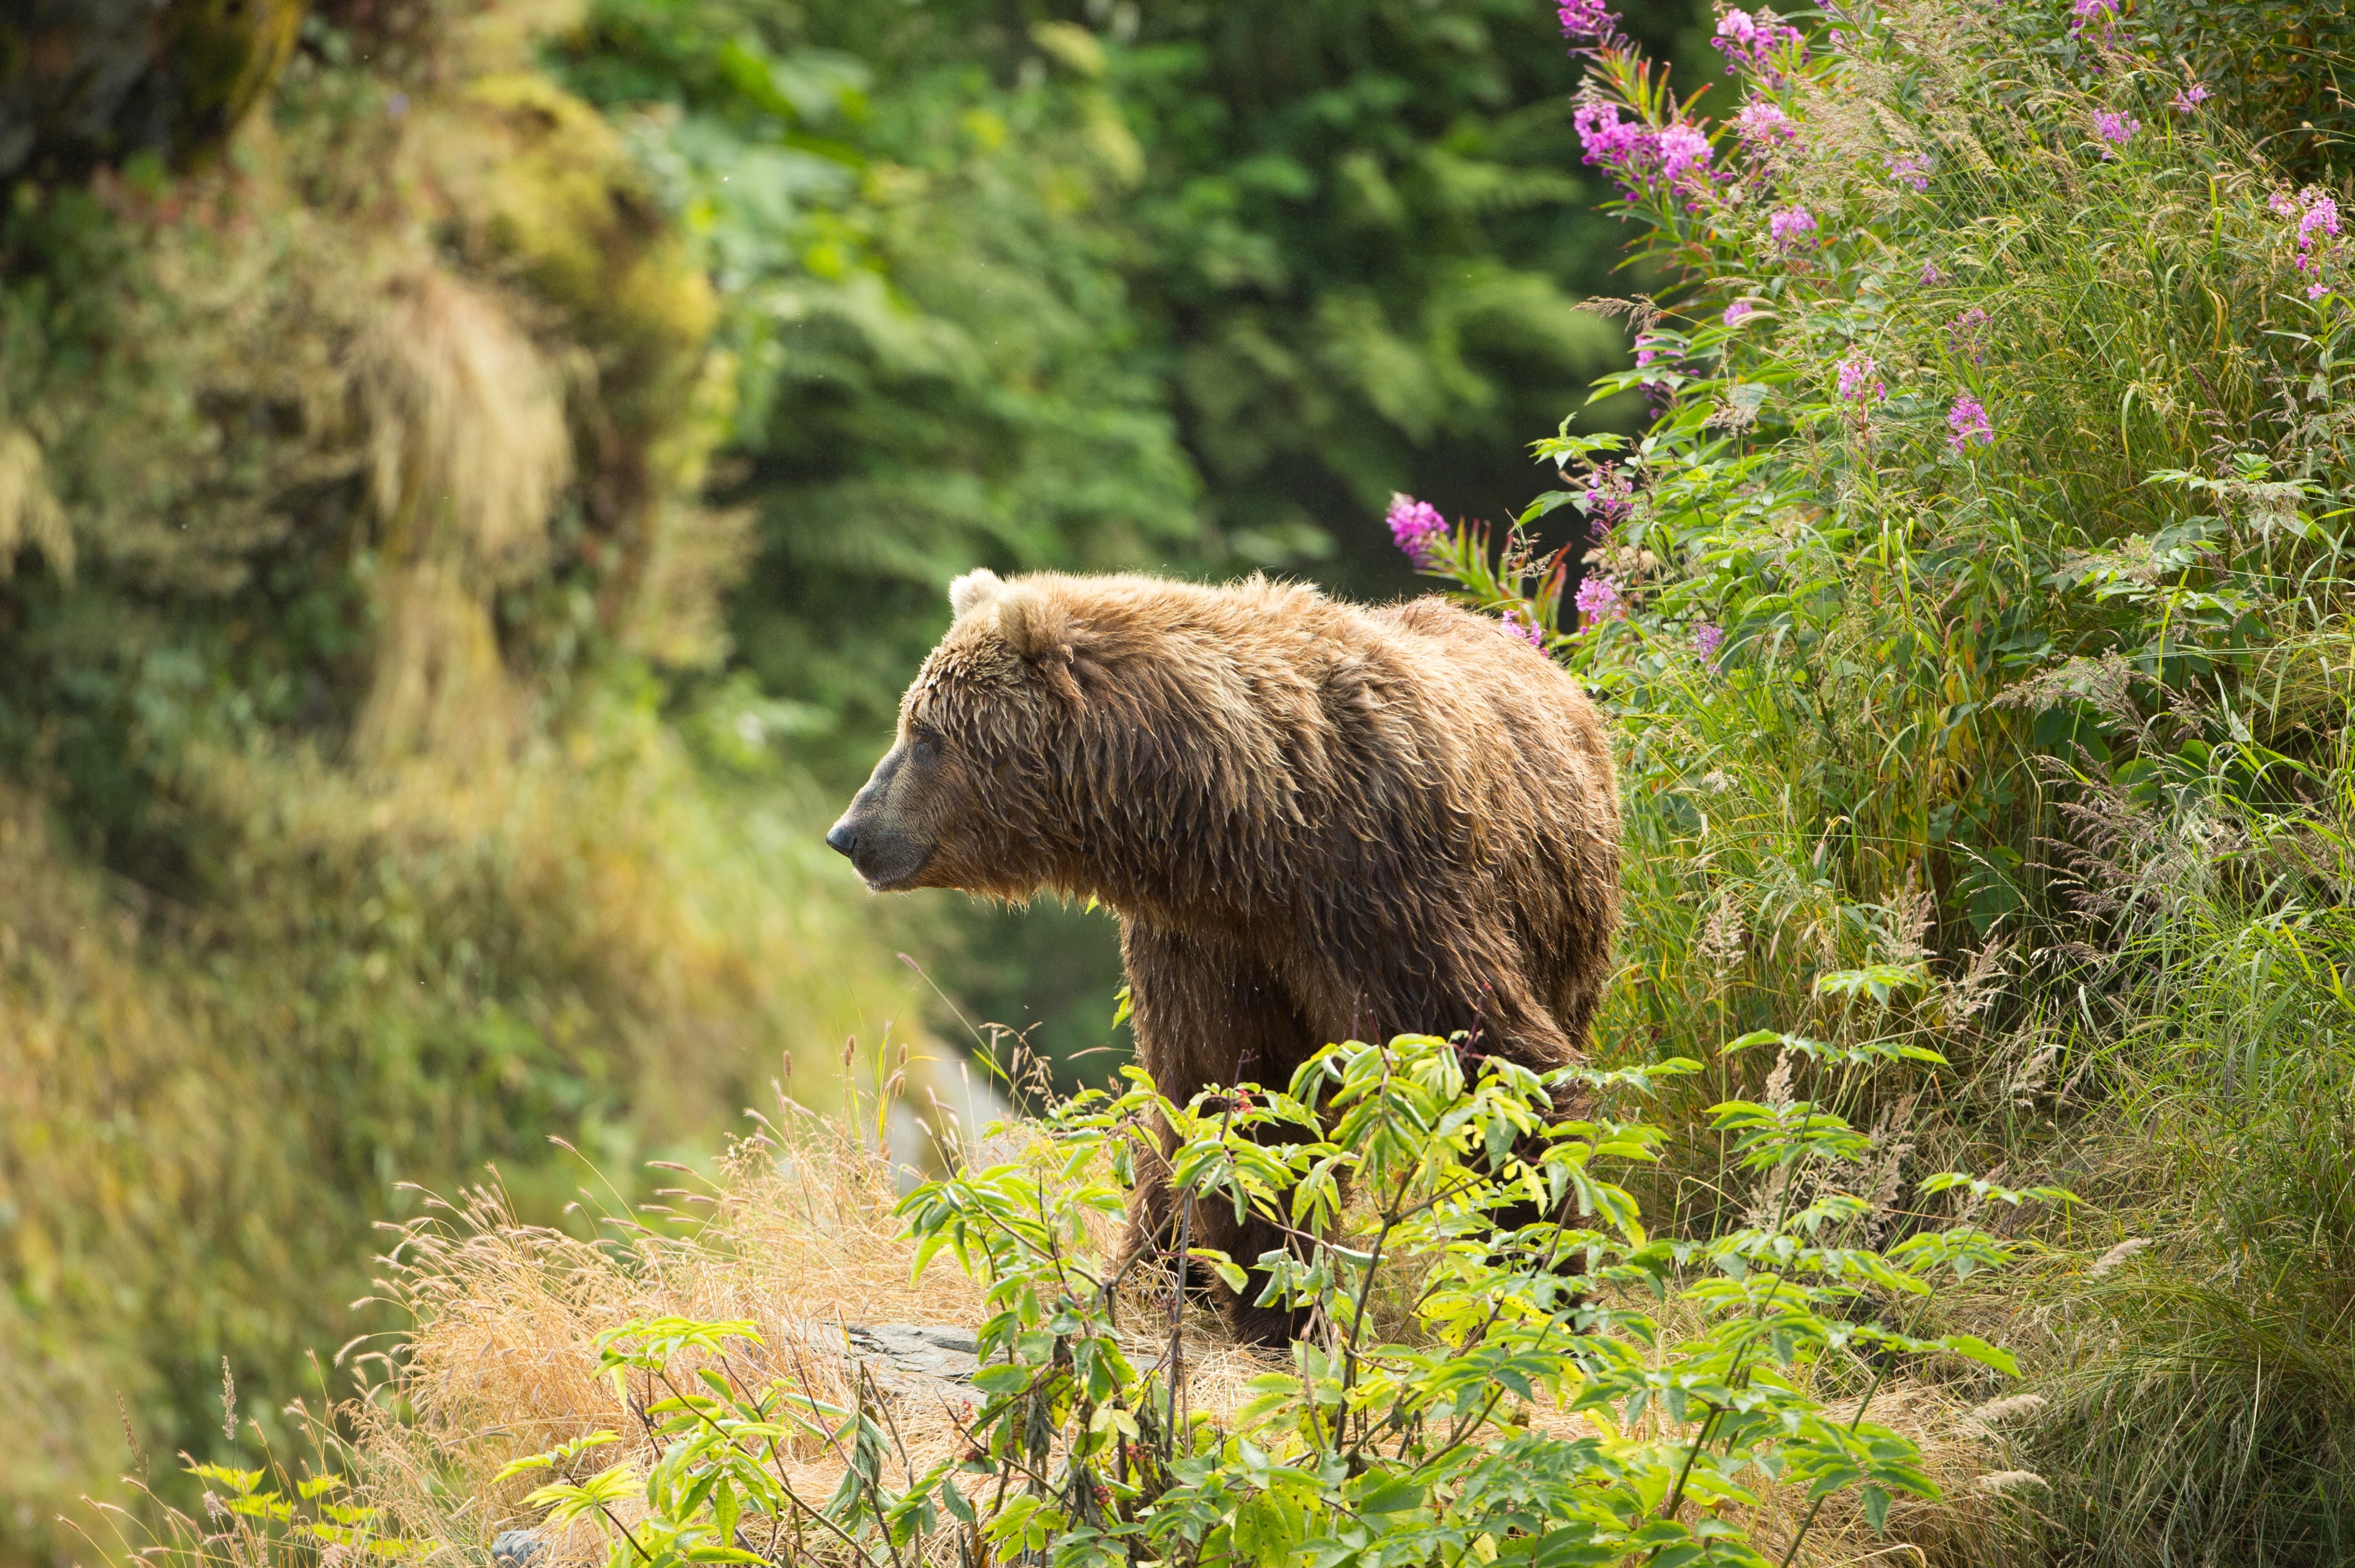 Blonde grizzly bear surrounded by green foliage